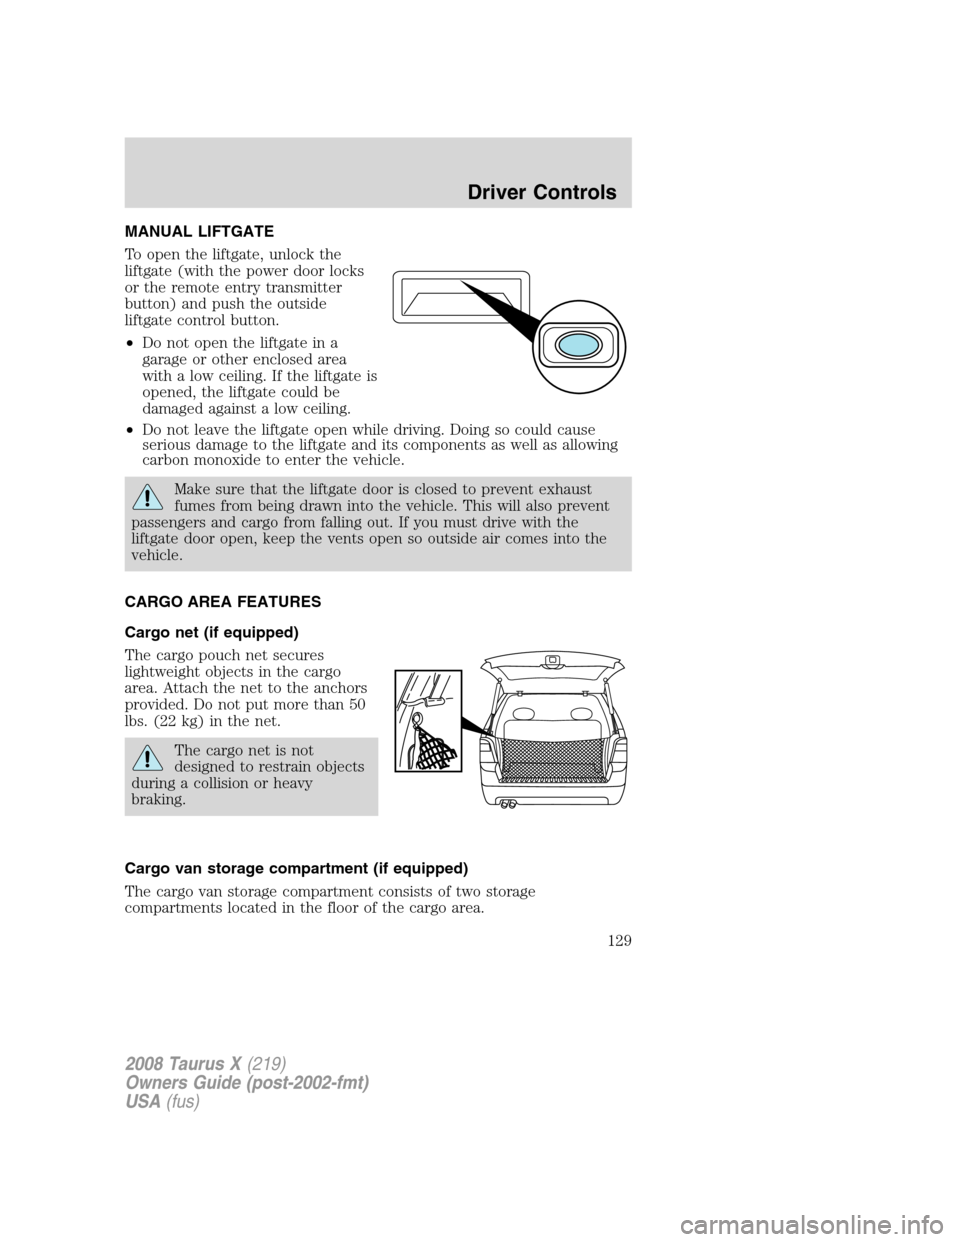 FORD TAURUS X 2008 1.G Service Manual MANUAL LIFTGATE
To open the liftgate, unlock the
liftgate (with the power door locks
or the remote entry transmitter
button) and push the outside
liftgate control button.
•Do not open the liftgate i